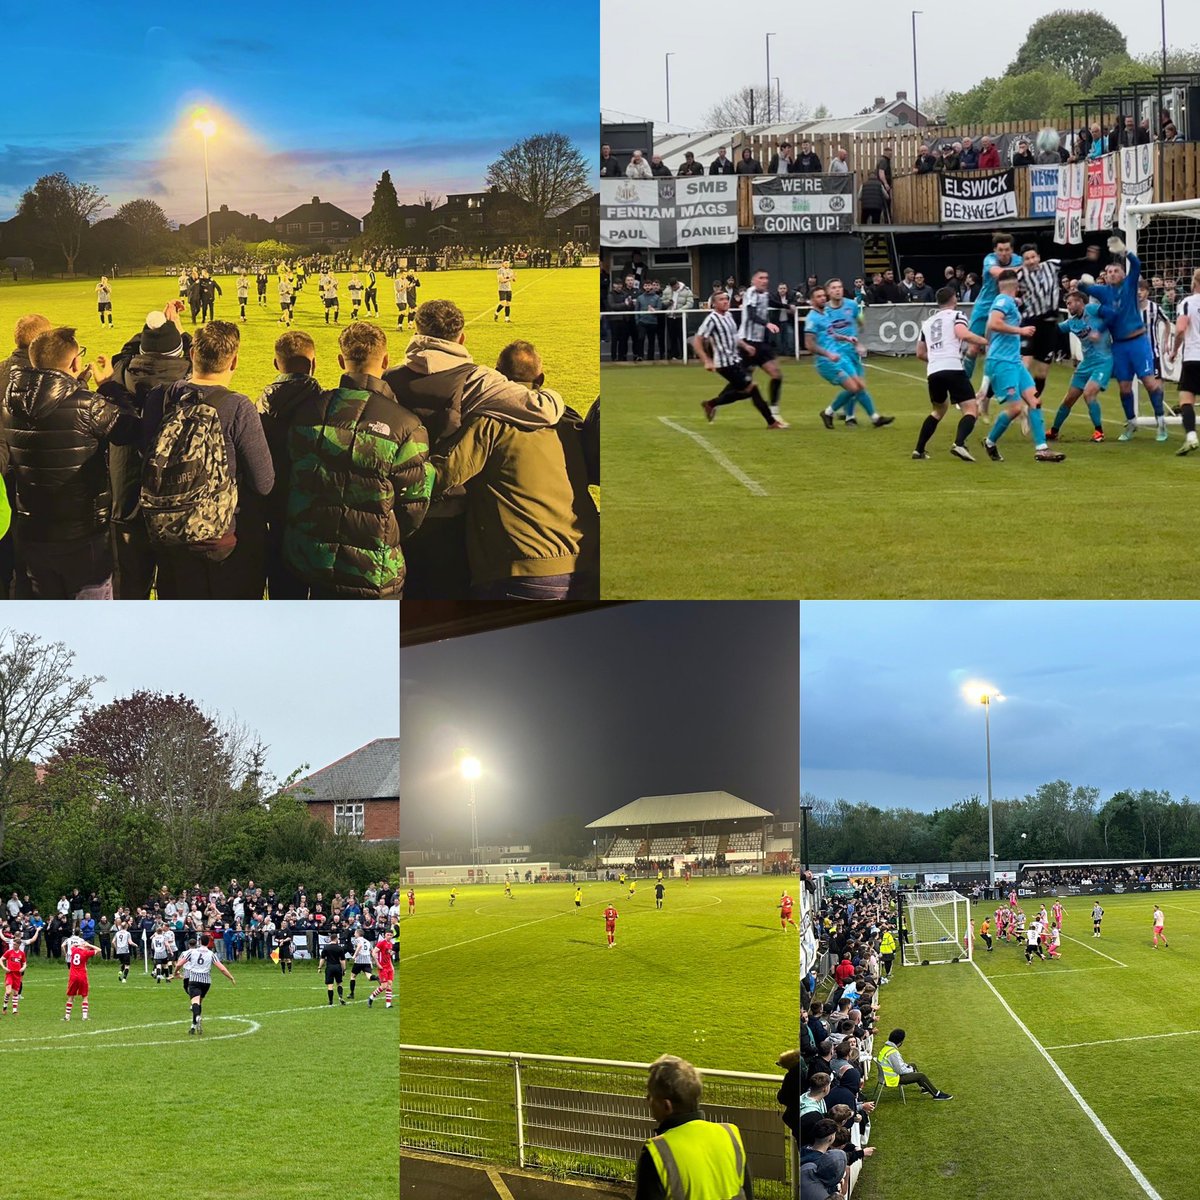 Just under 7,100 supporters watched the semi-final and finals of the Northern League Division One and Division Two play-offs over the last week. The six ties had an average attendance of 1,181 and provided some wonderful memories.